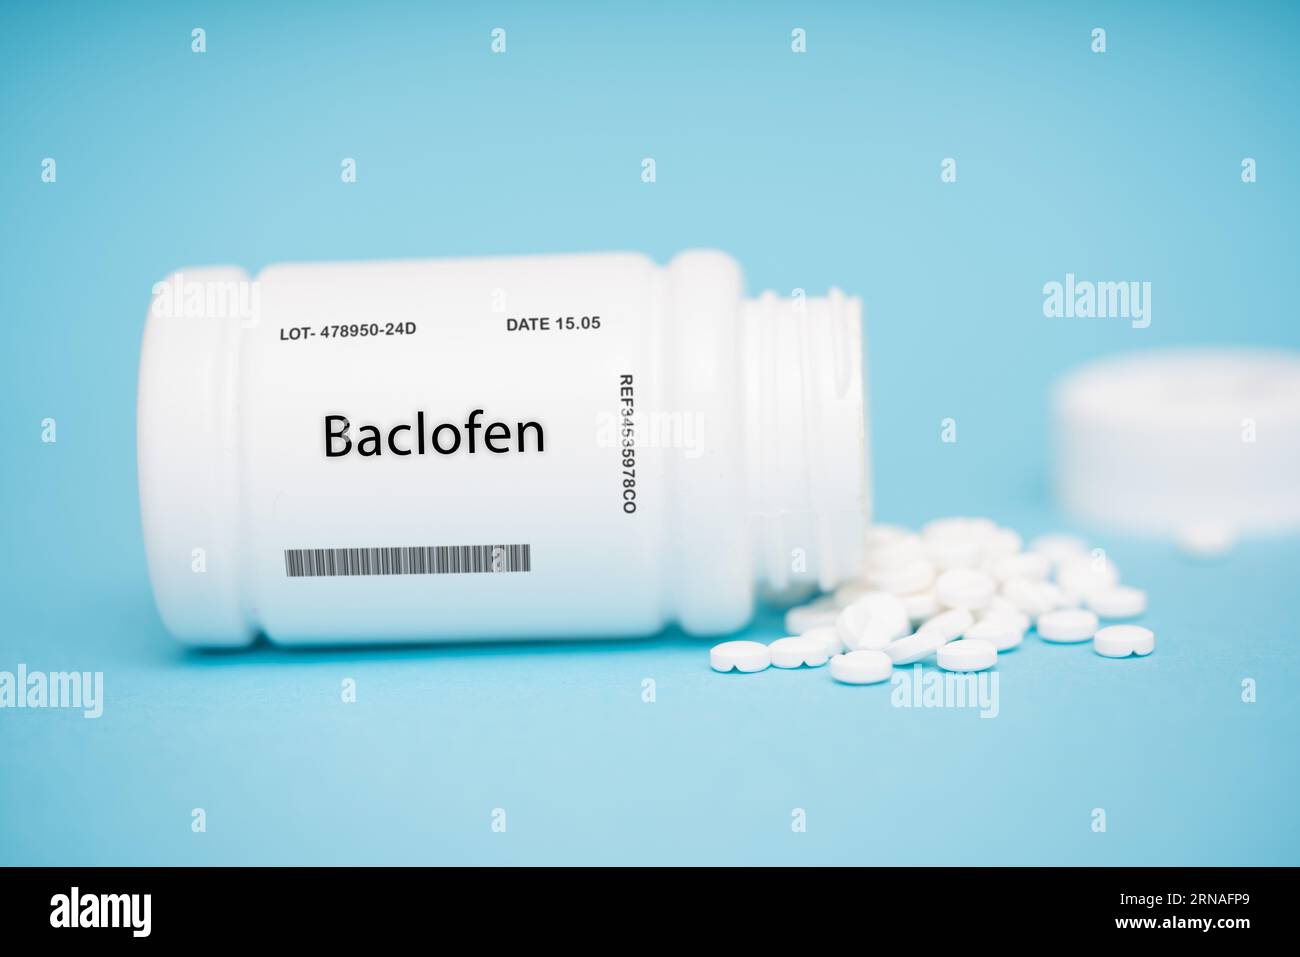 Baclofen, A medication used to treat muscle spasms and tightness, Muscle spasms, muscle tightness, Tablet, injection Stock Photo